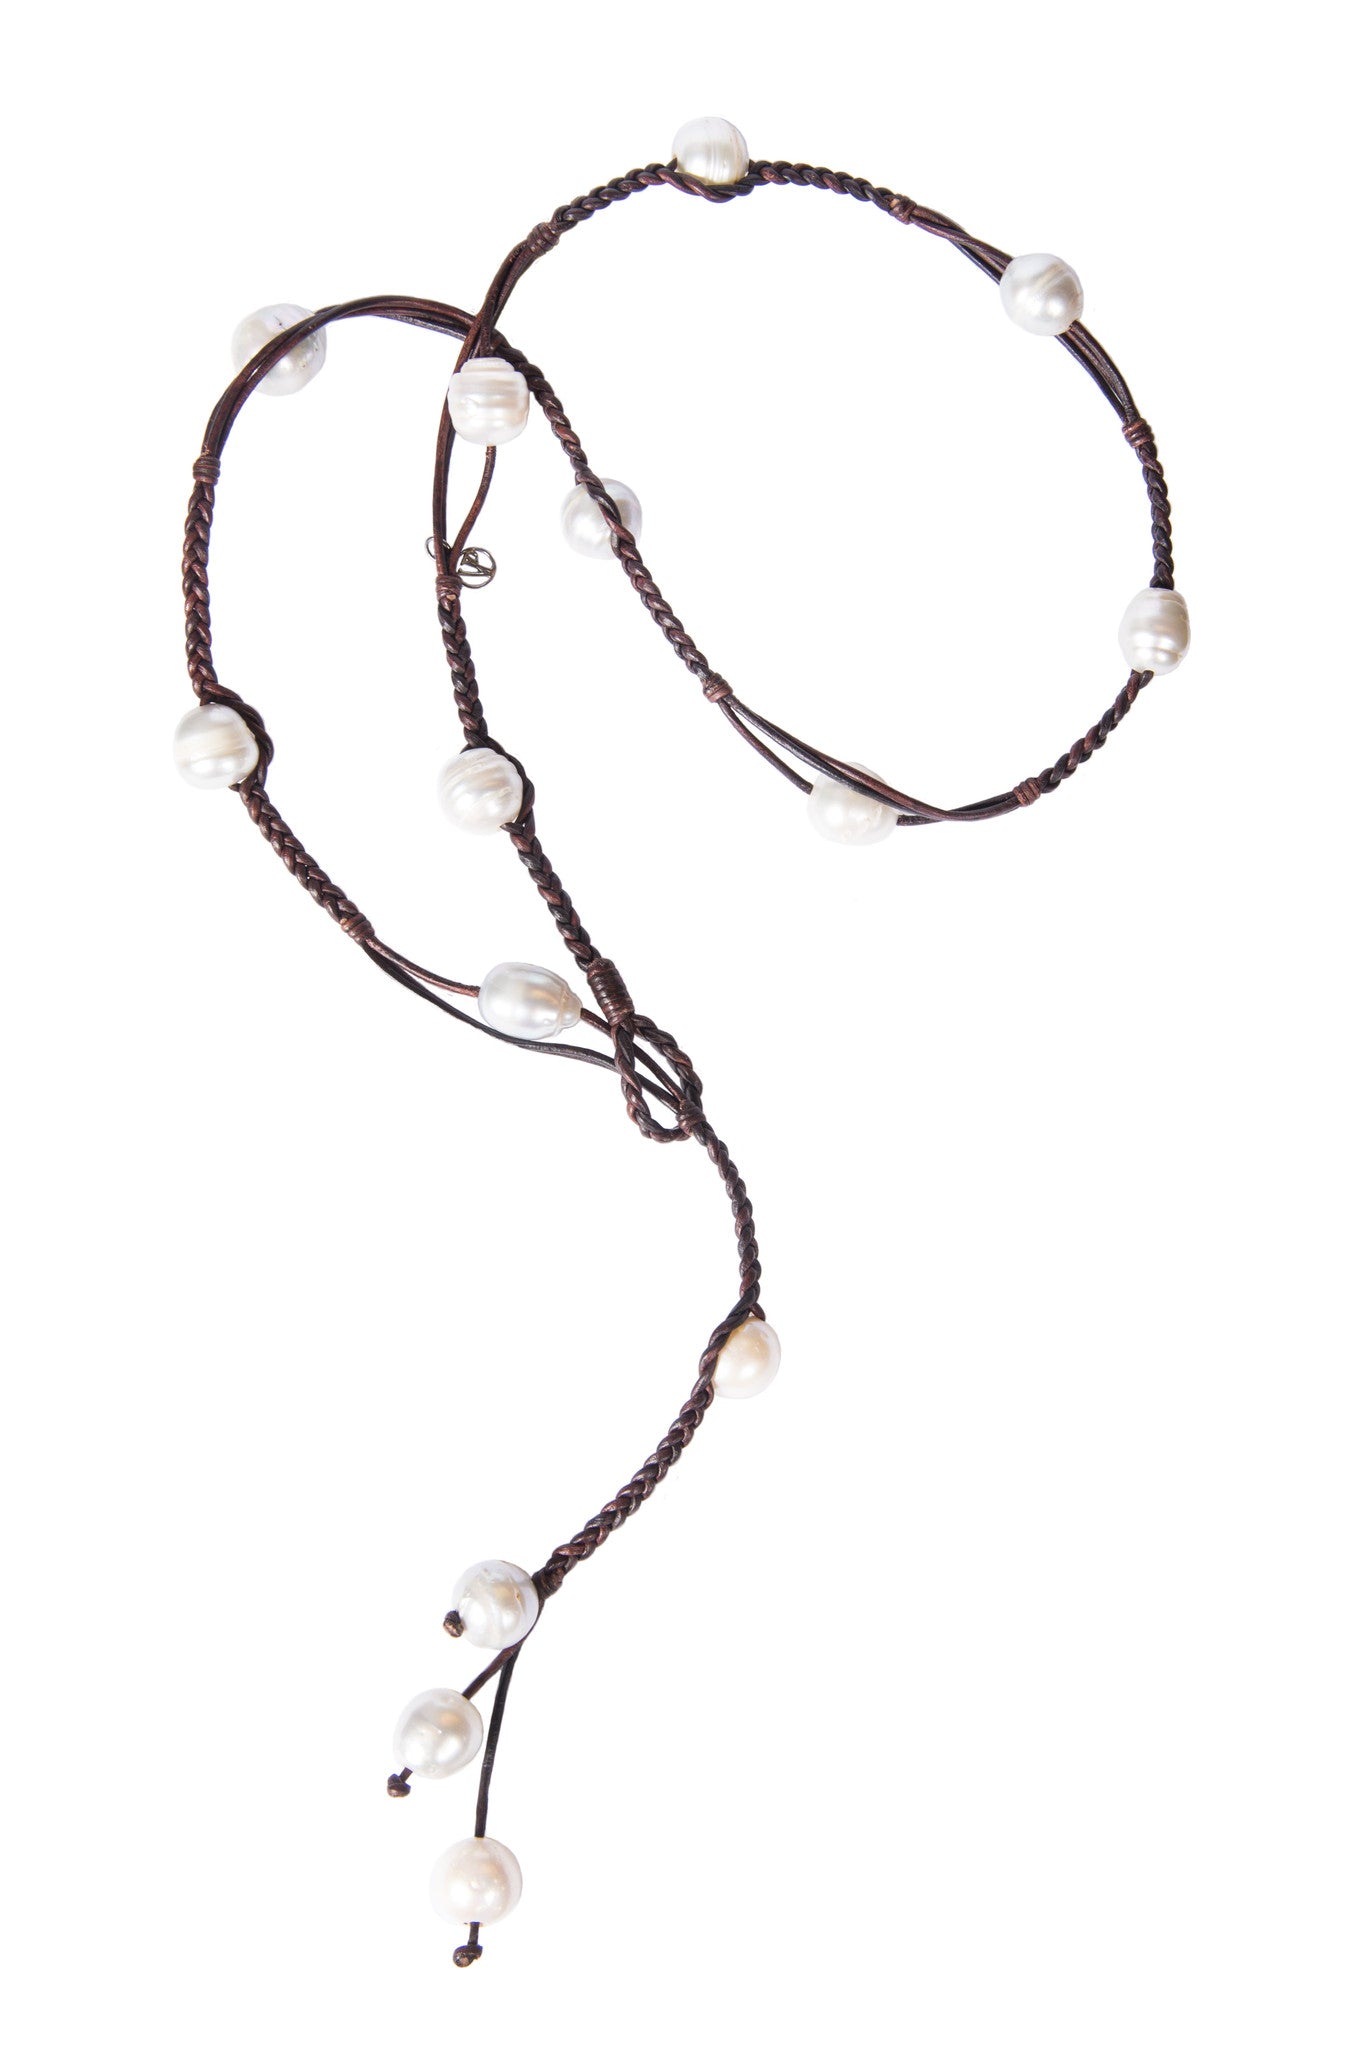 Bohemian Lariat SS - Hottest Designer Pearl and Leather Jewelry | VINCENT PEACH
